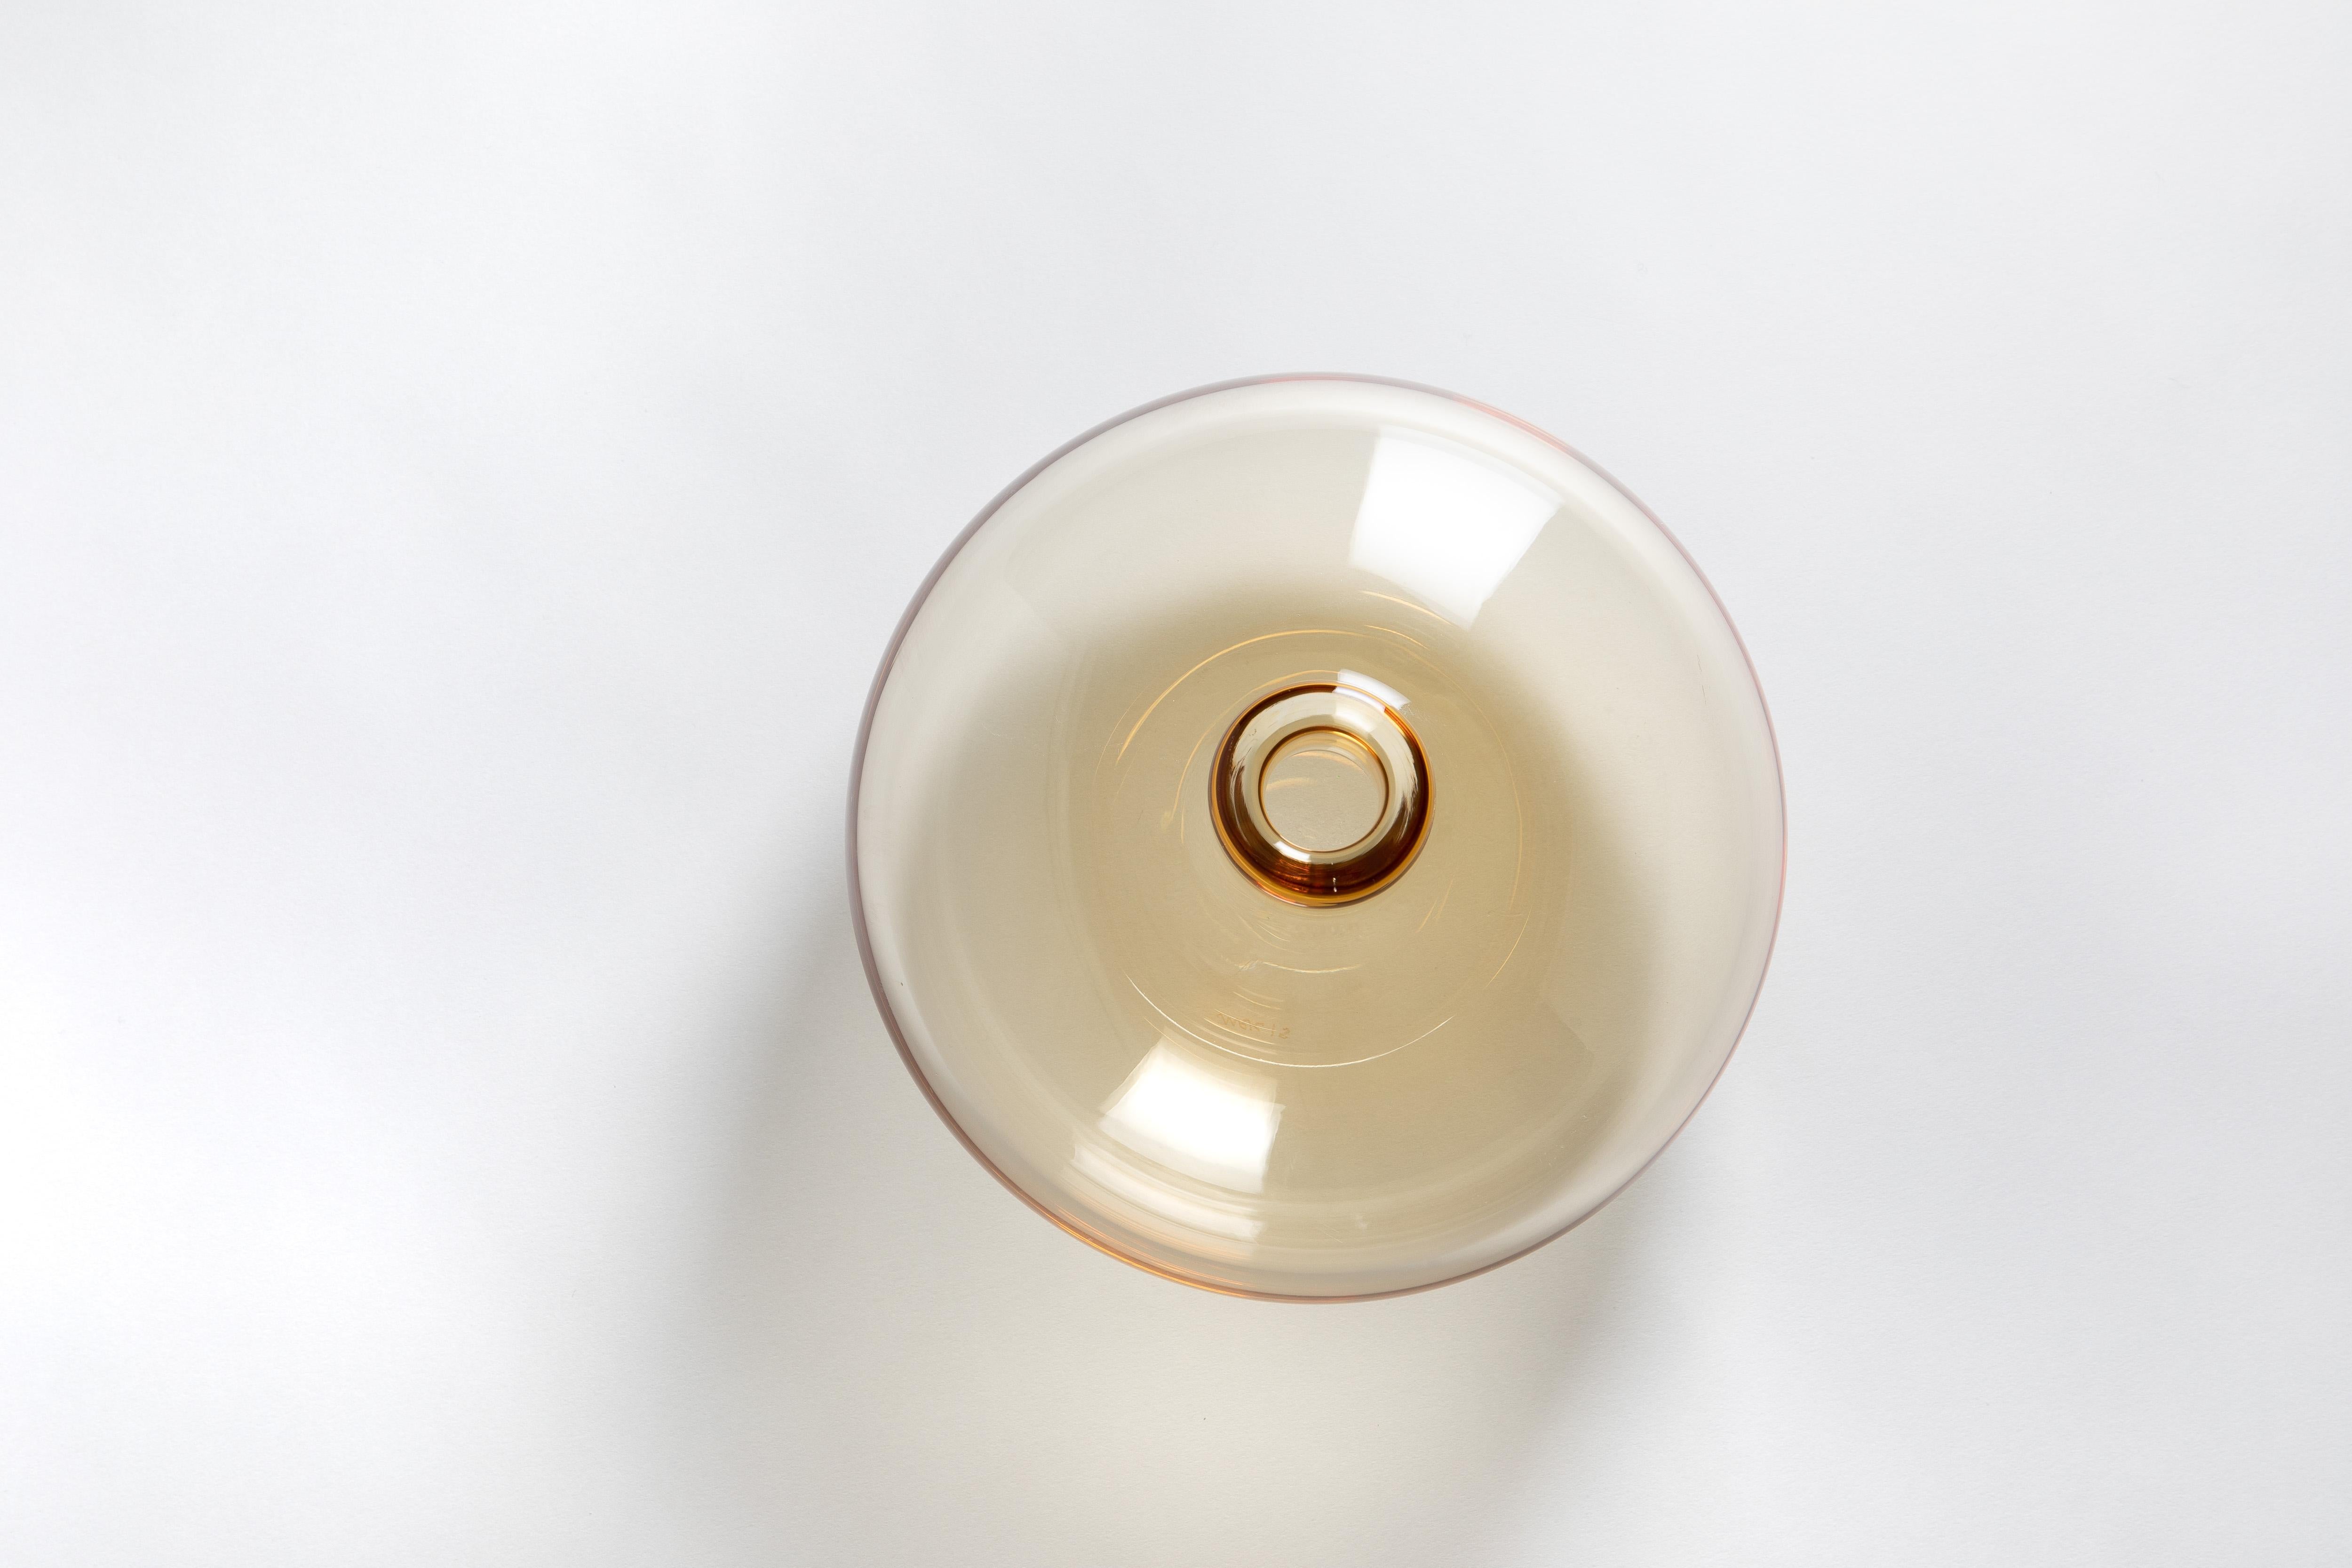 Inspired by the Greek village of the same name, the Monastiri vase is hand blown in Murano. The simple form and muted colour results in a piece of timeless elegance.
Each Yali piece is handcrafted and signed. Sizes and shapes vary slightly, and